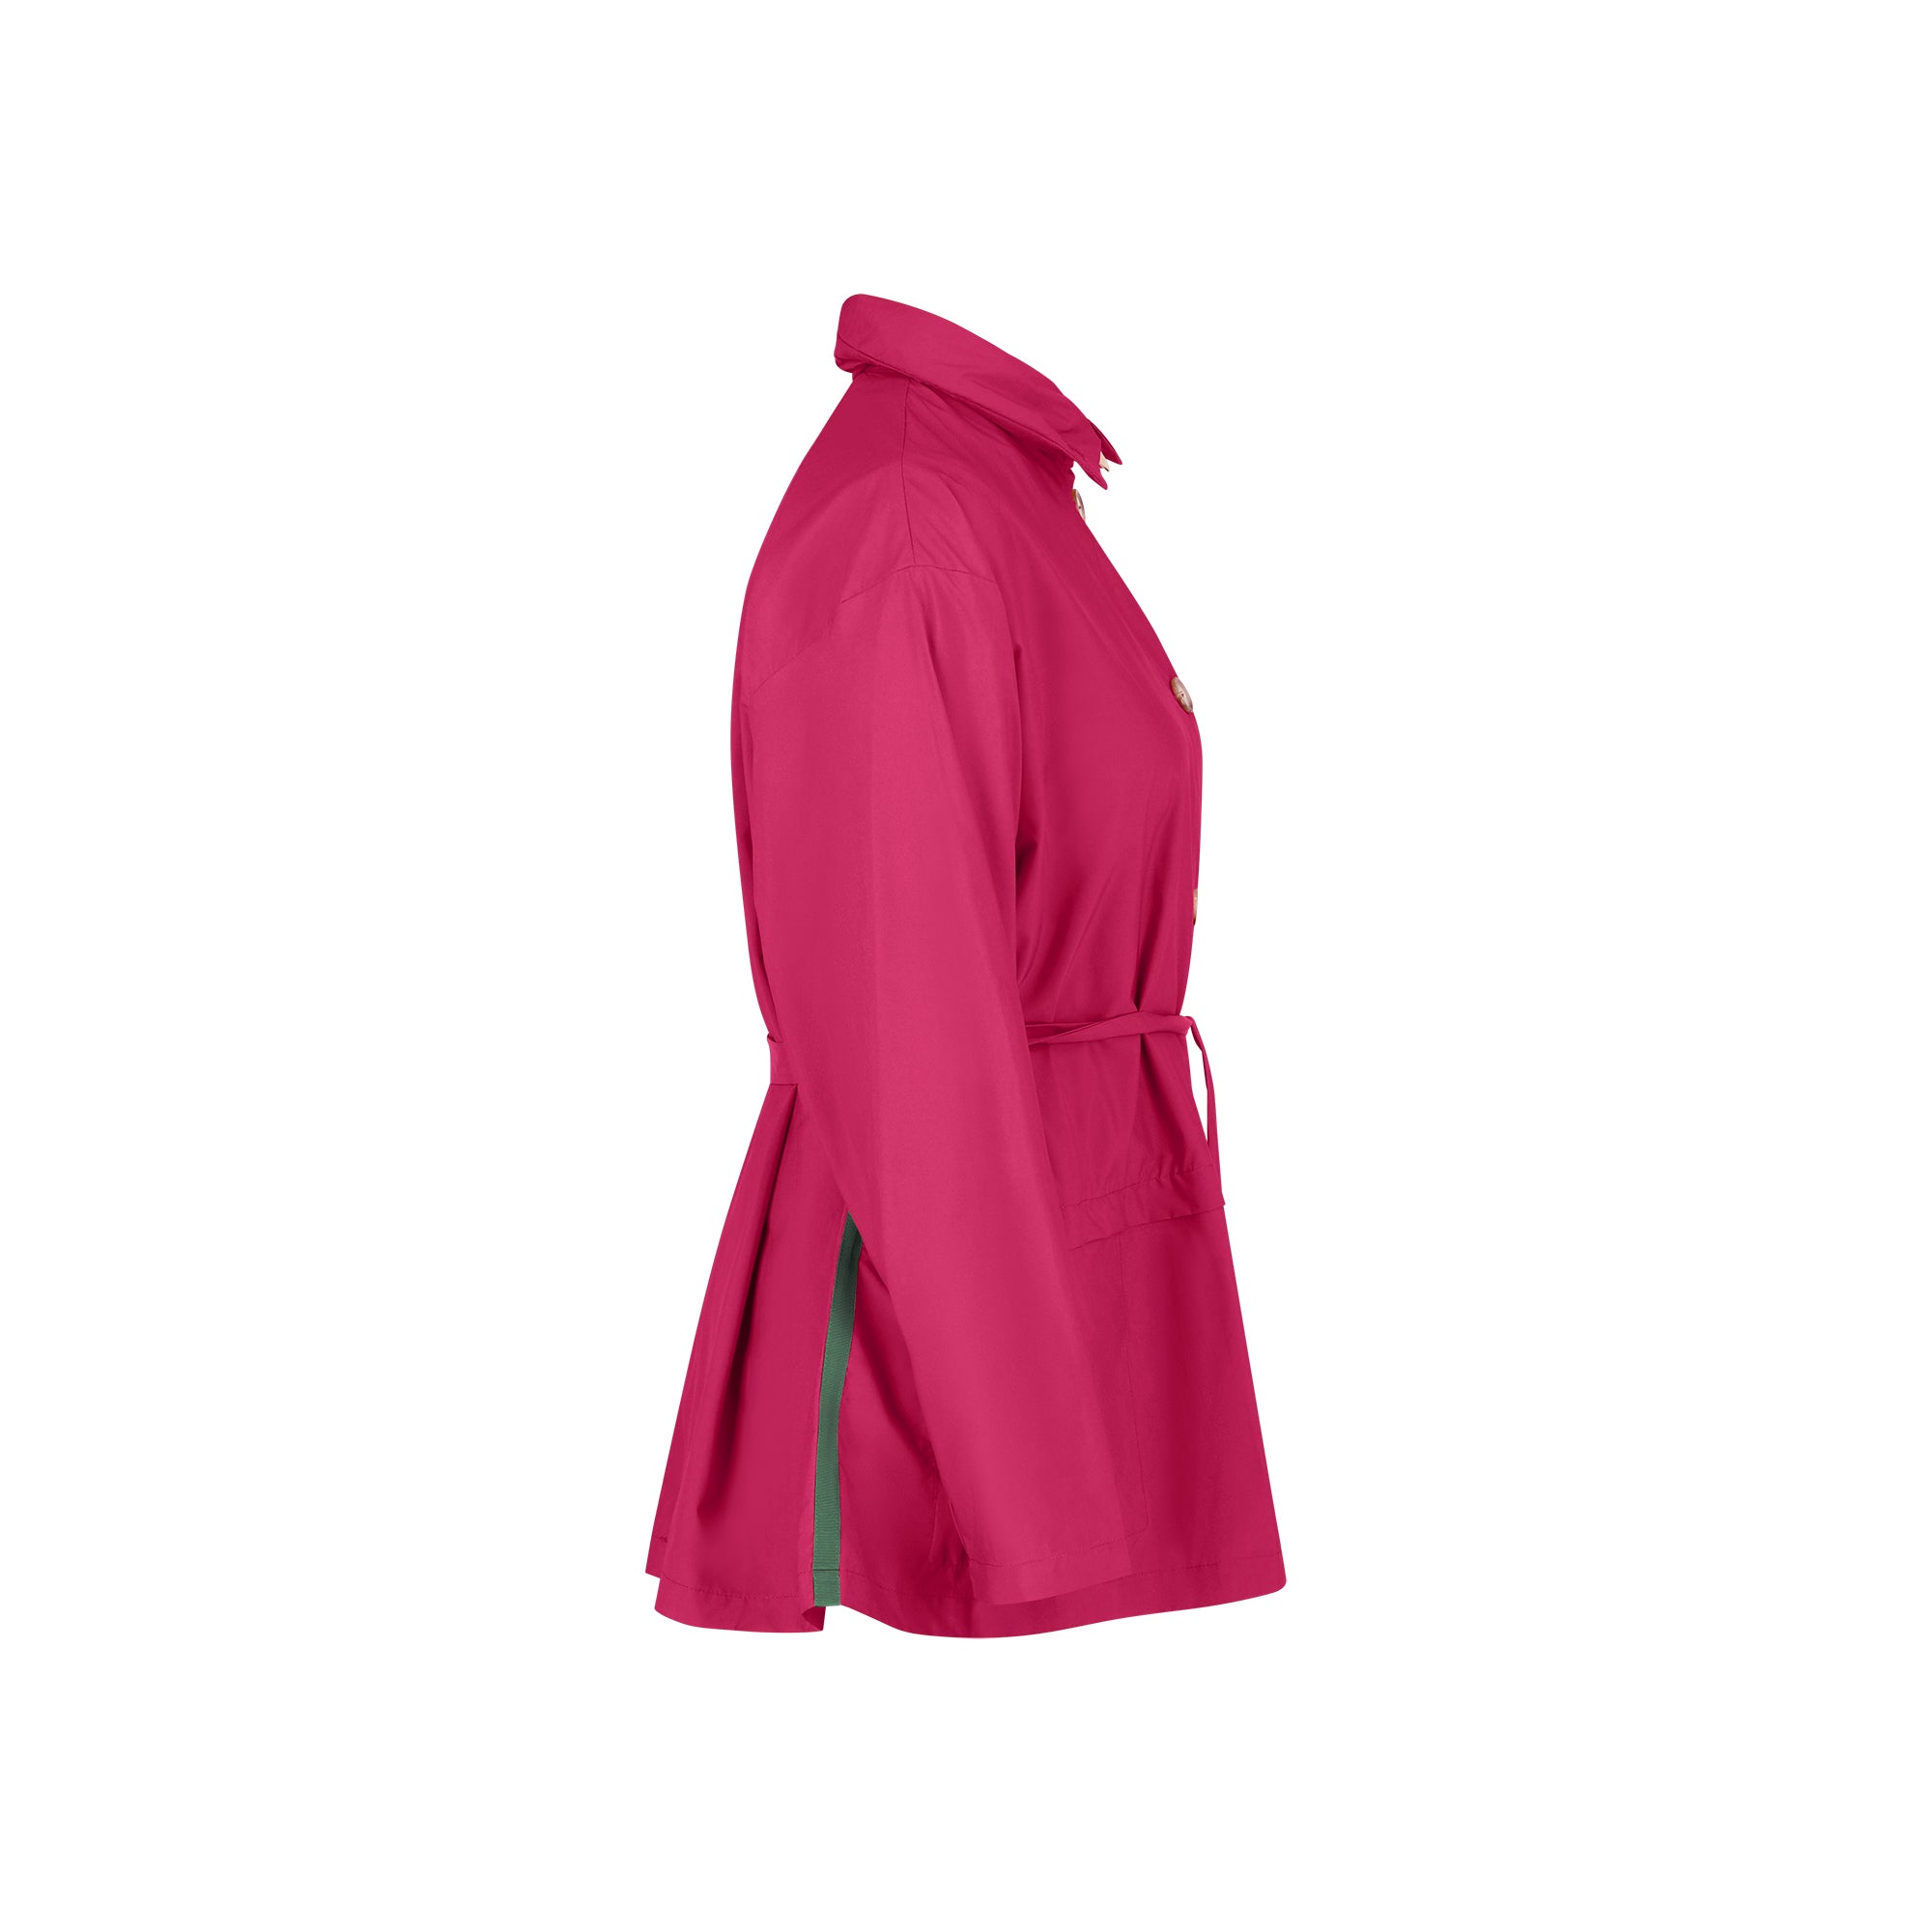 Bise raincoat - Cherry color - side view